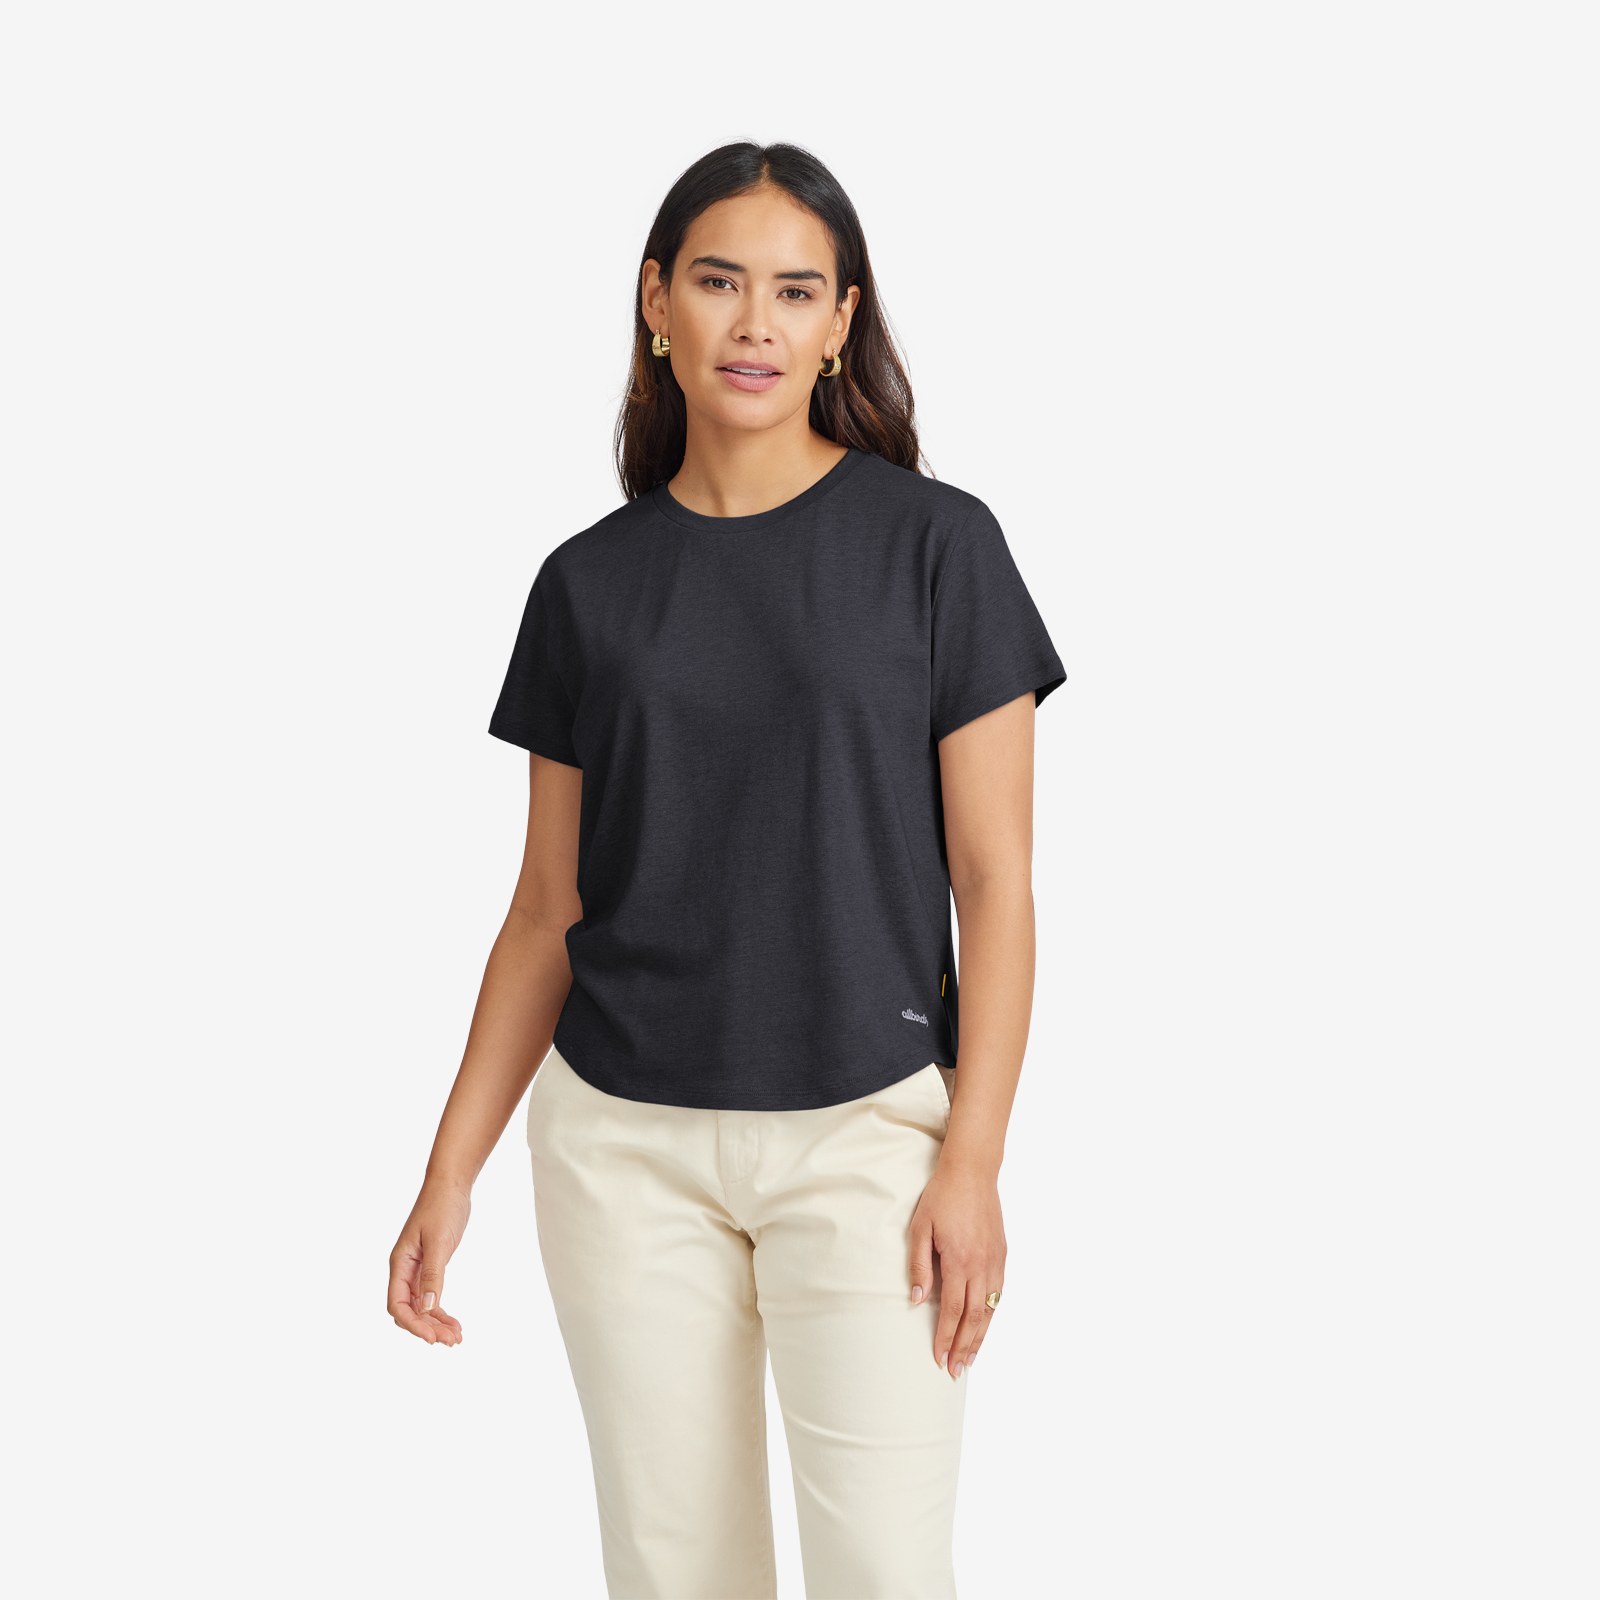 Women's Anytime Tee - Natural Black